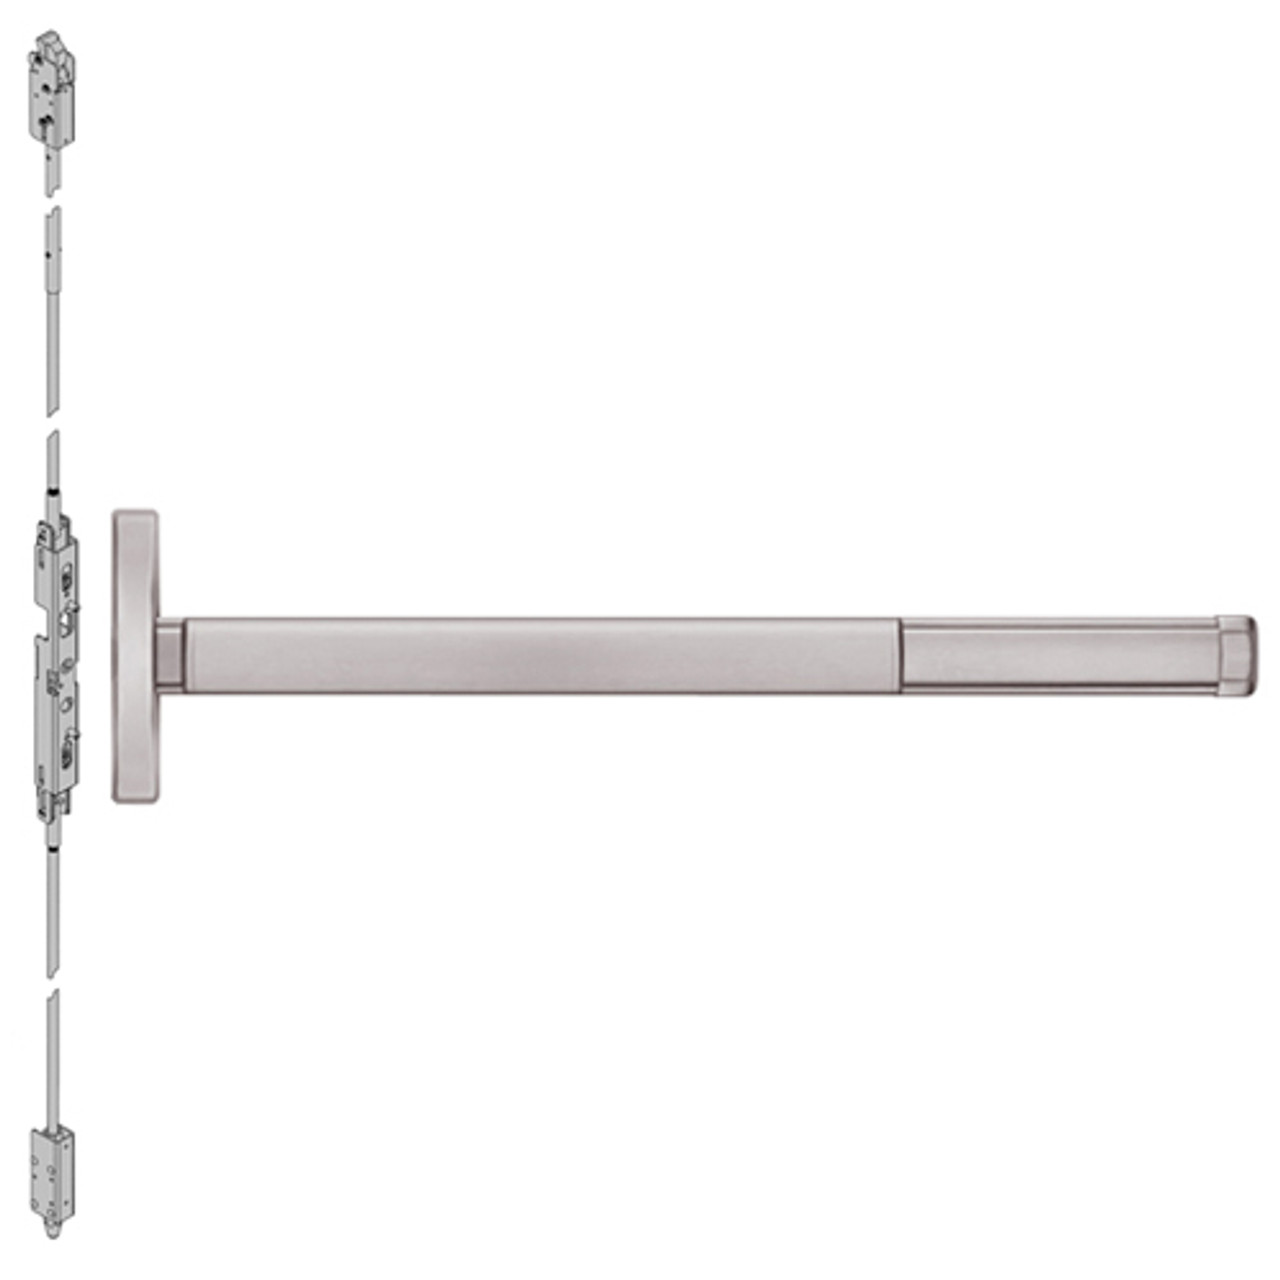 ELRFL2602LBR-628-36 PHI 2600 Series Fire Rated Concealed Vertical Rod Exit Device with Electric Latch Retraction Prepped for Dummy Trim in Satin Aluminum Finish